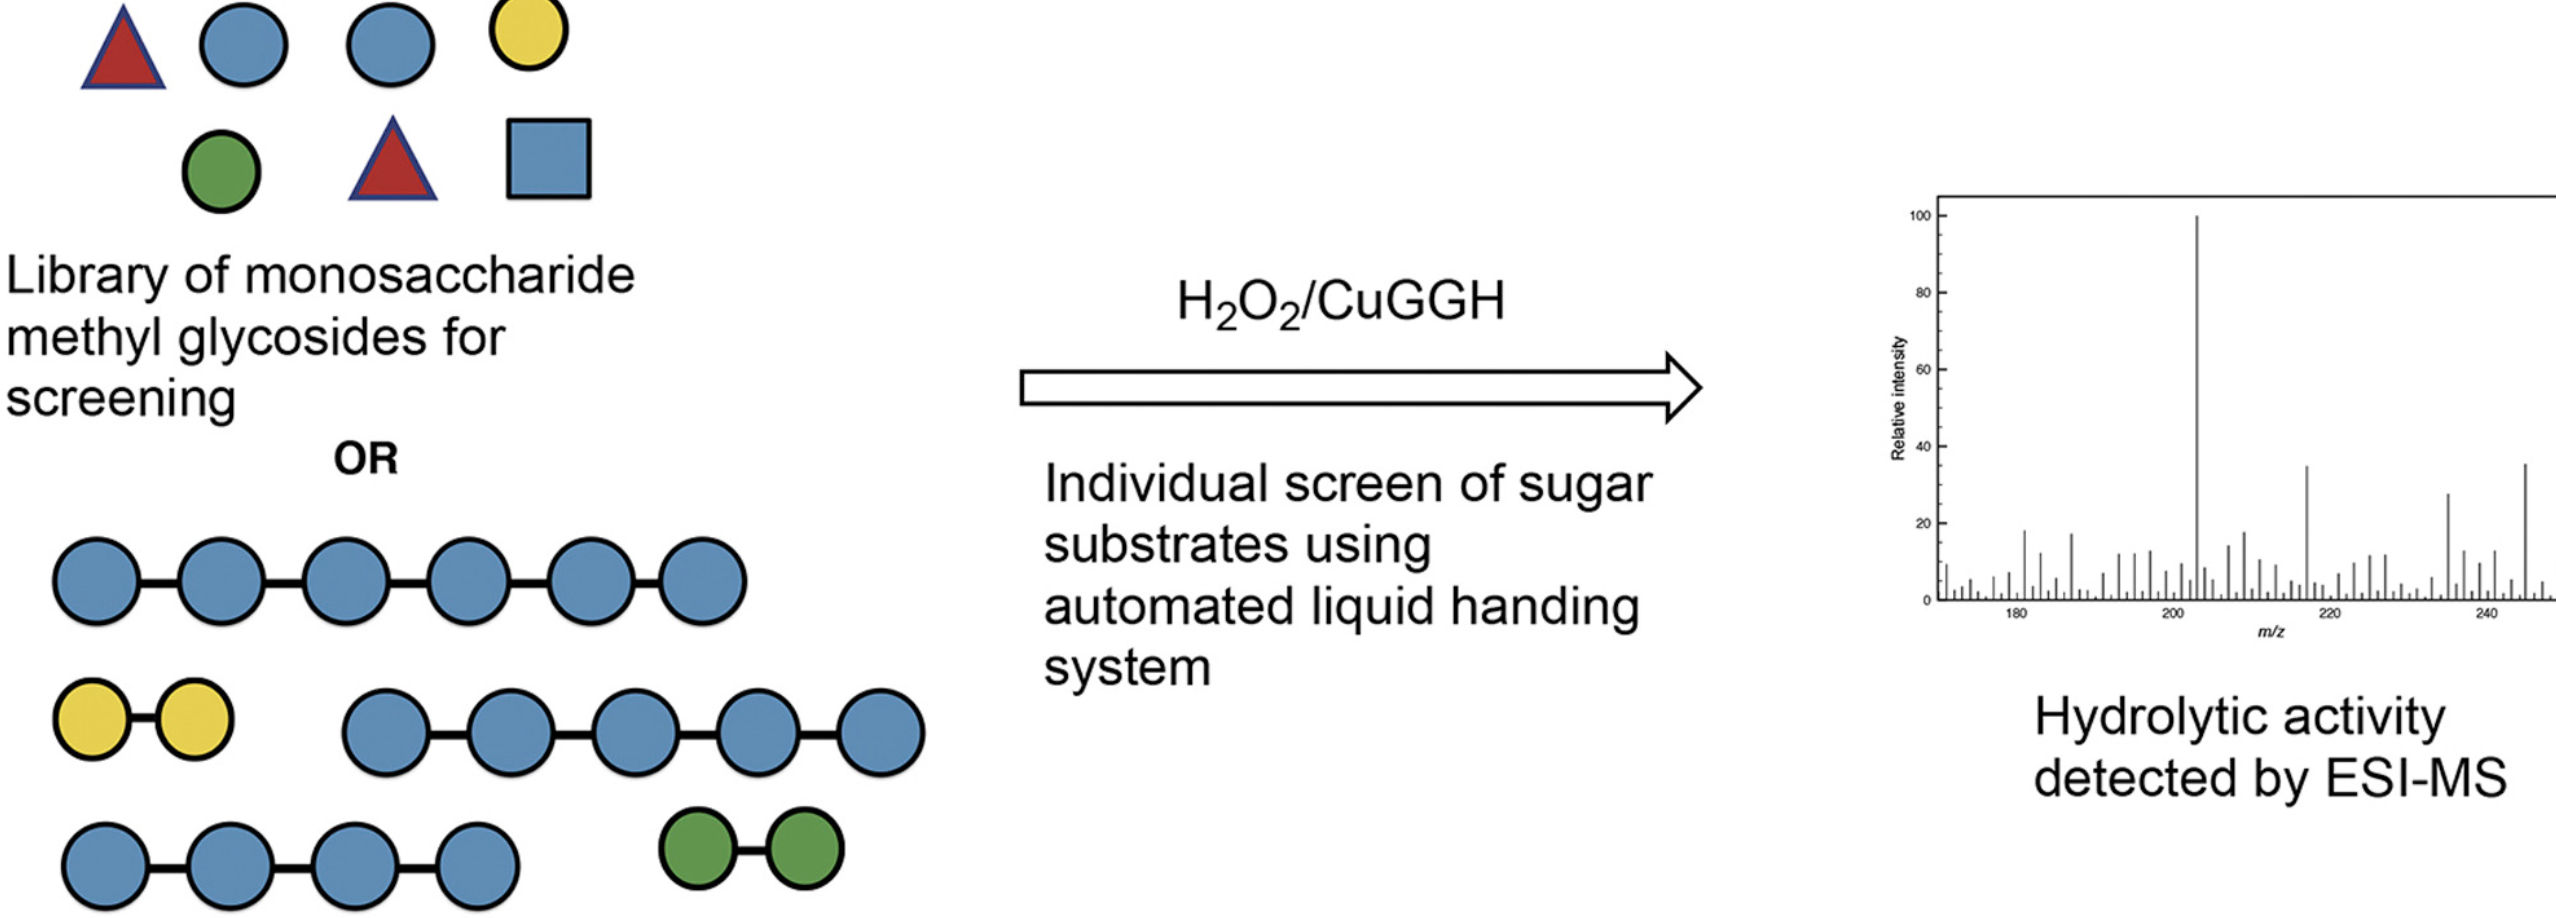 Scope and limitations of carbohydrate hydrolysis for de novo glycan sequencing using a hydrogen peroxide/metallopeptide-based glycosidase mimic